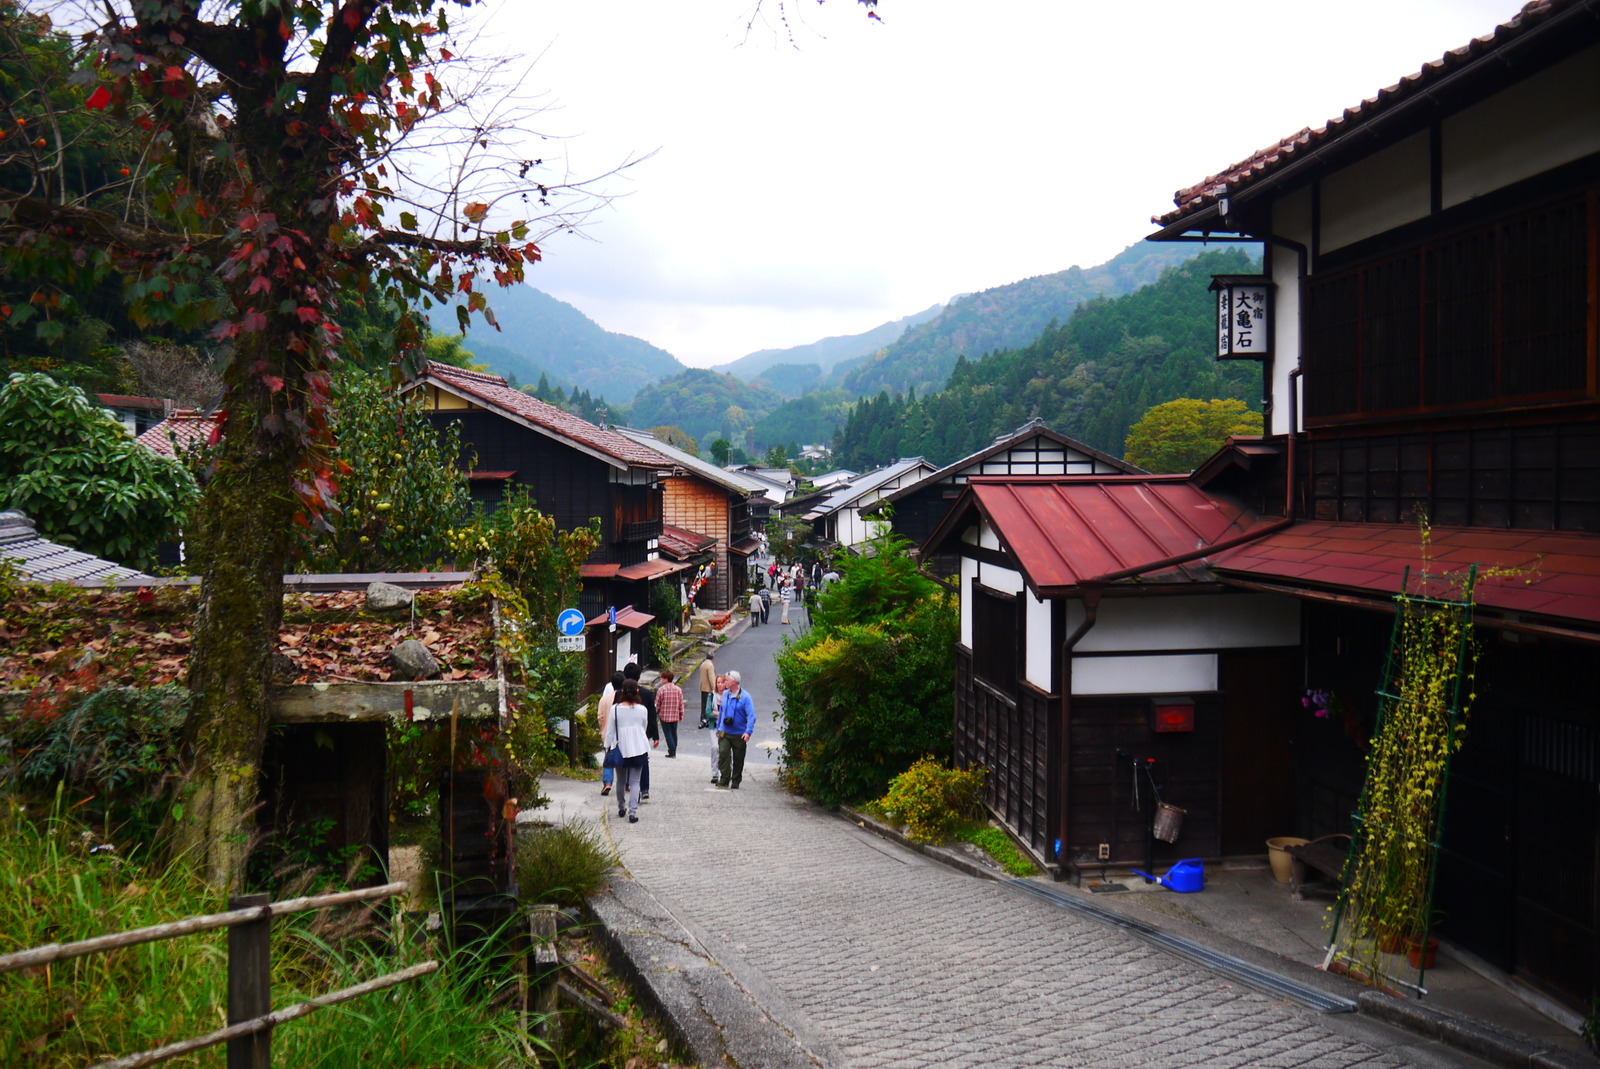 3-Day Japanese History and Culture Tour of Nagano from Osaka